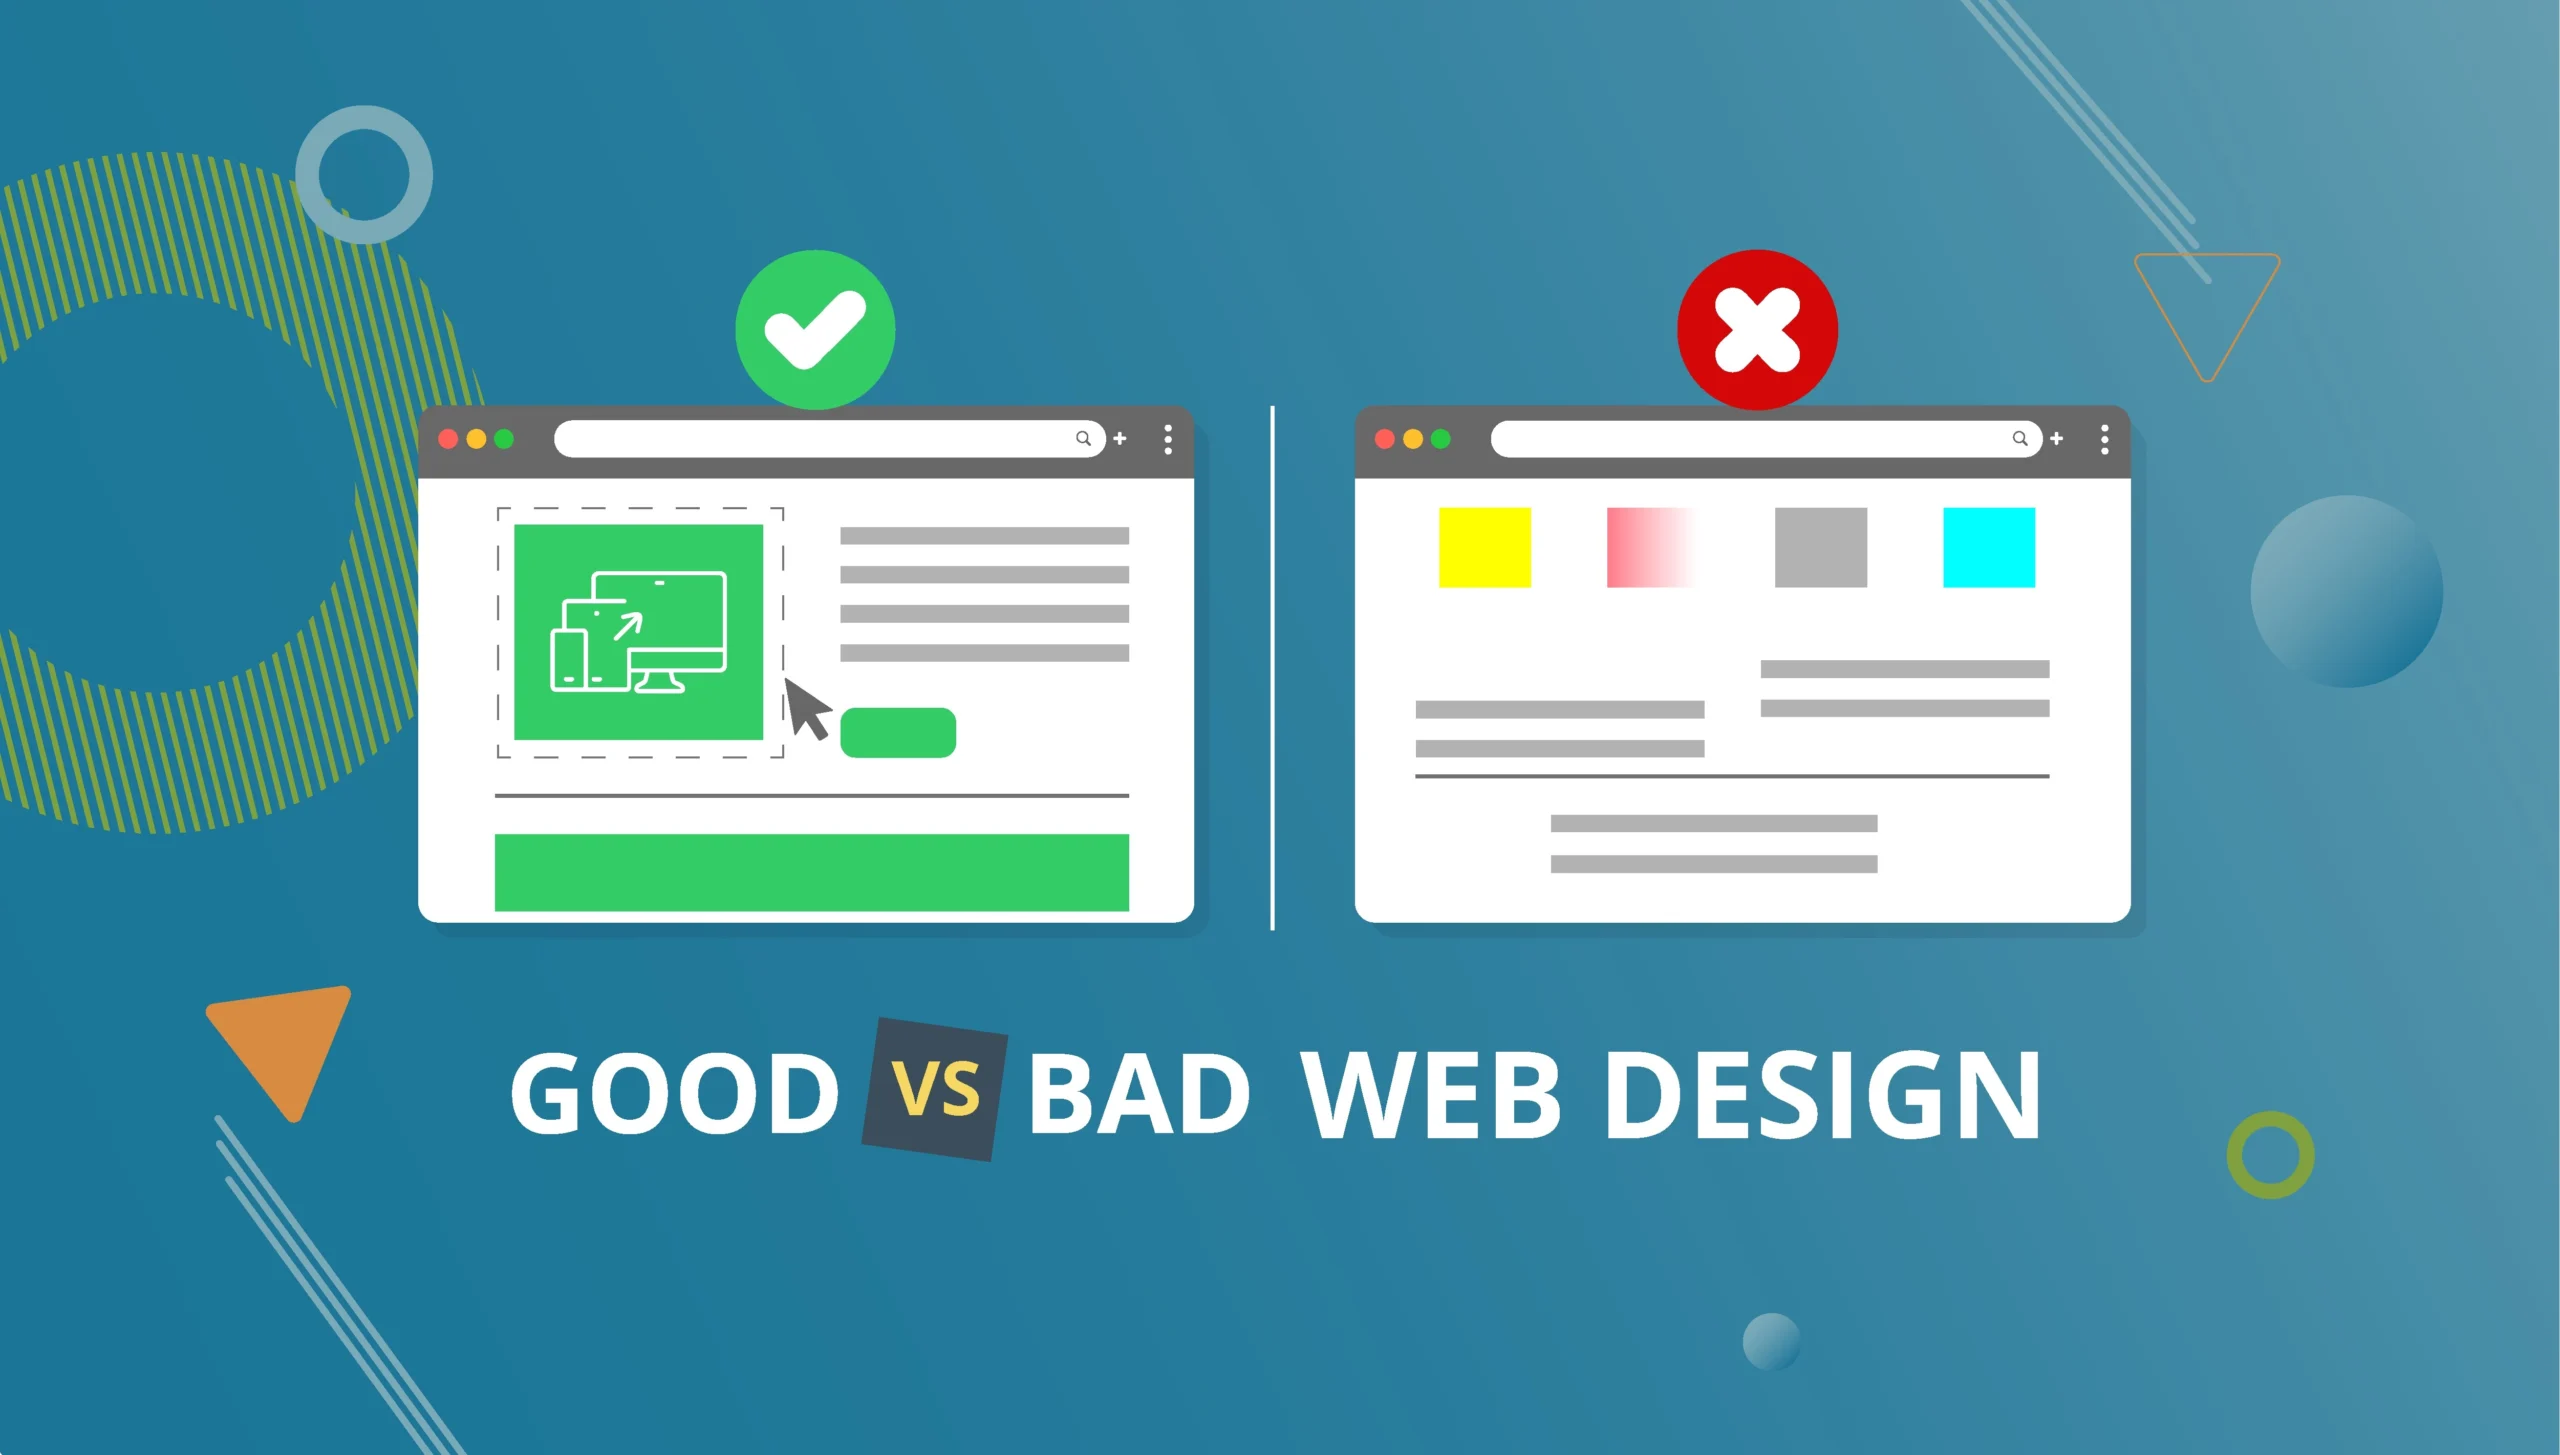 A good website design can increase your business value and influence customer behavior